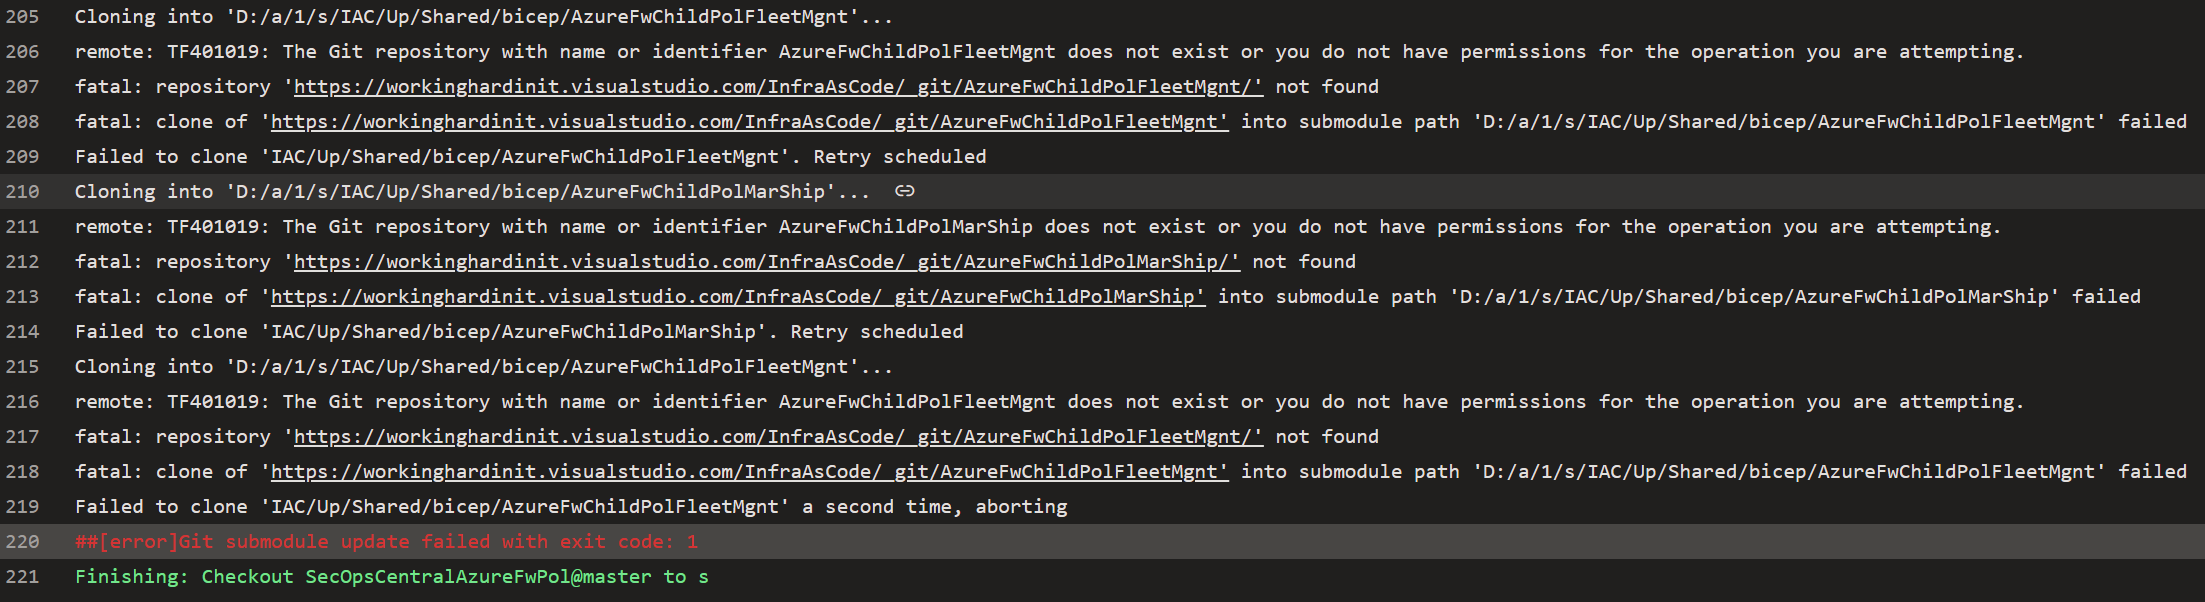 The checkout stage fails with an error when cloning the submodules